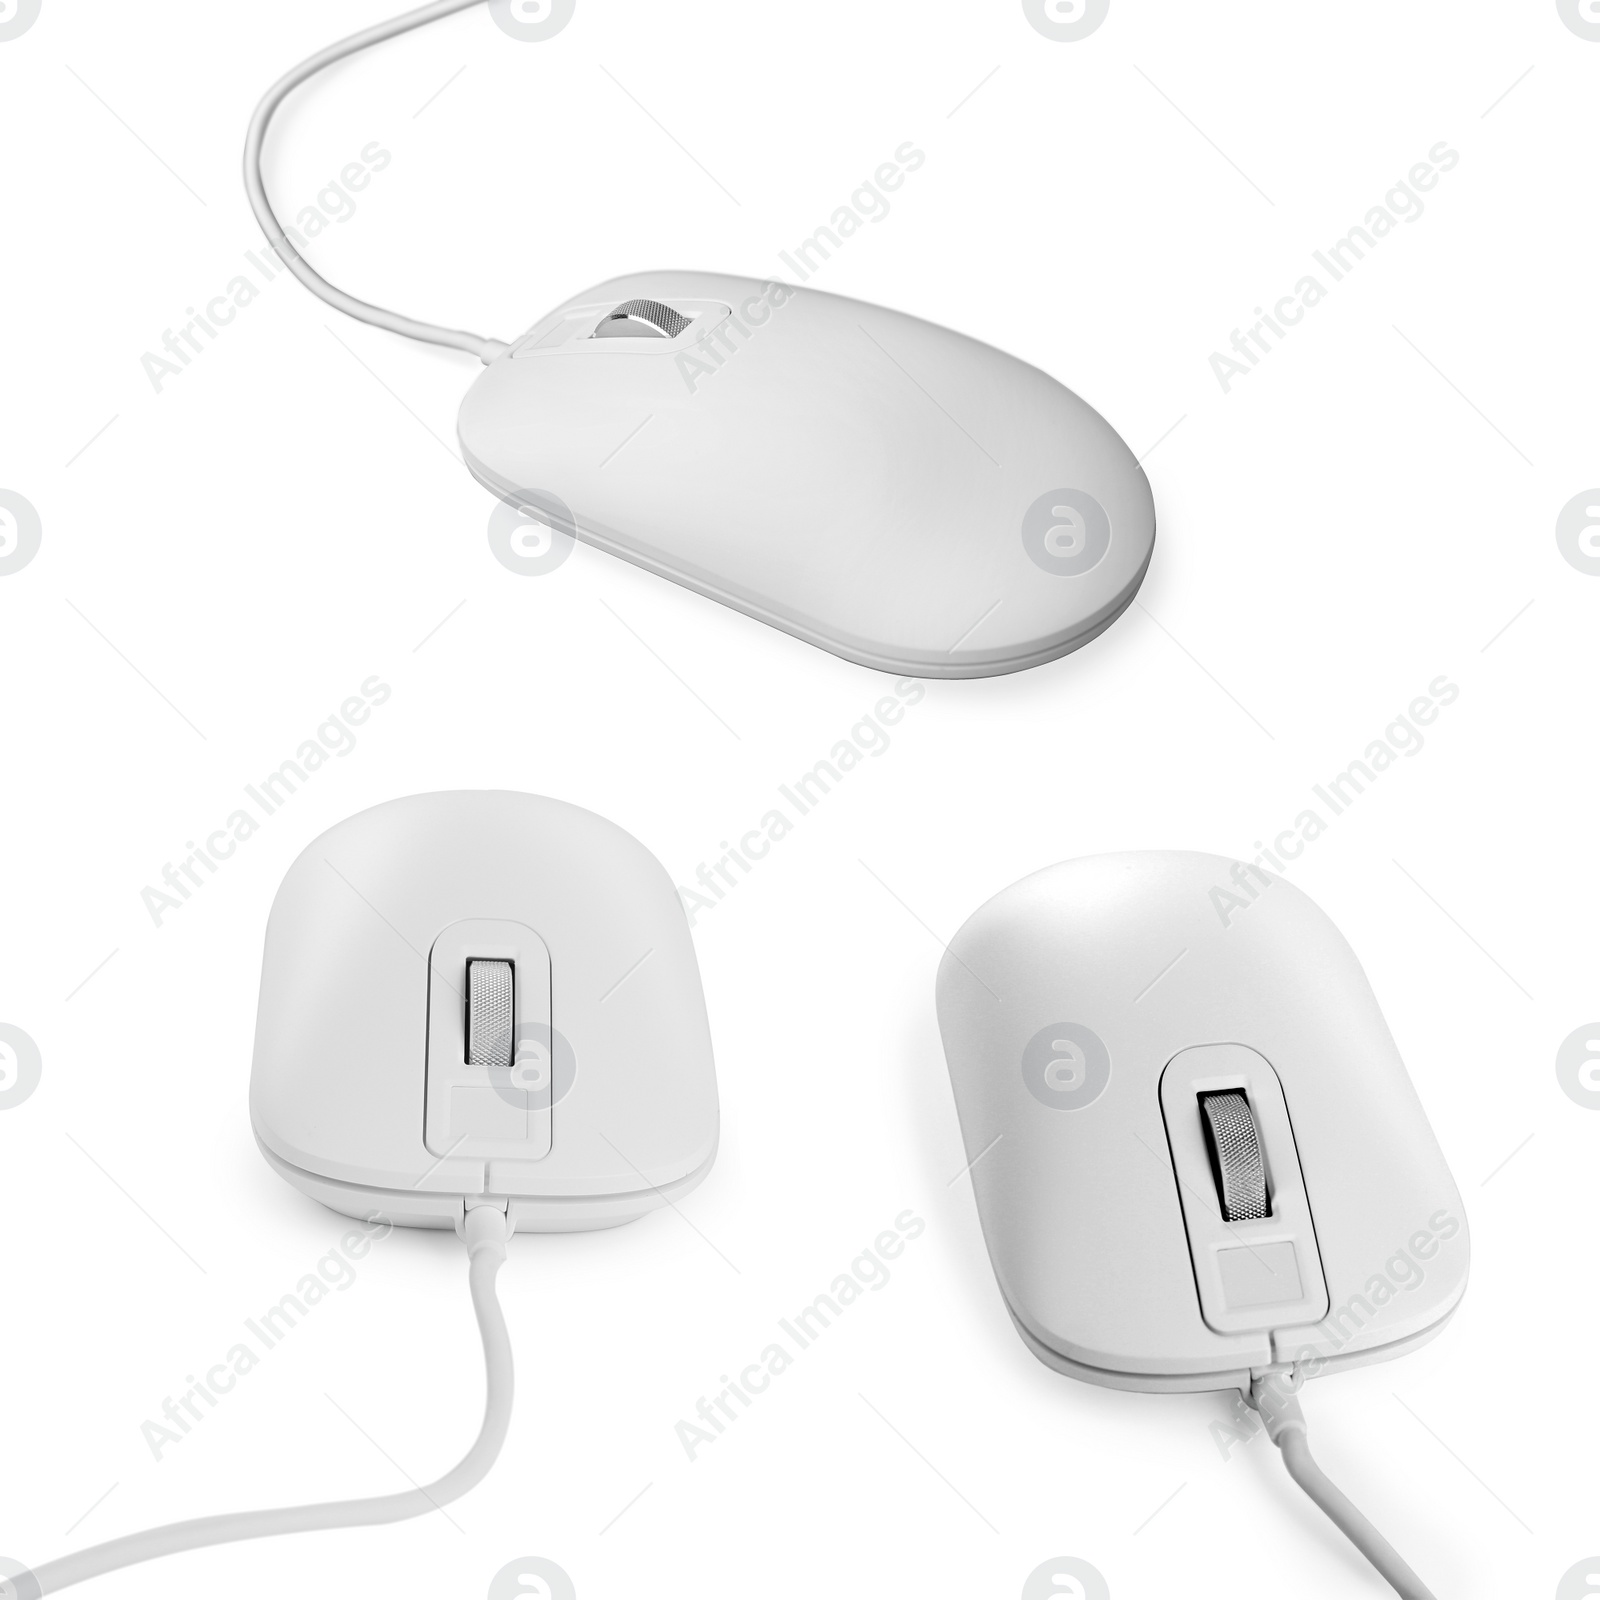 Image of Modern computer mouse on white background, views from different sides